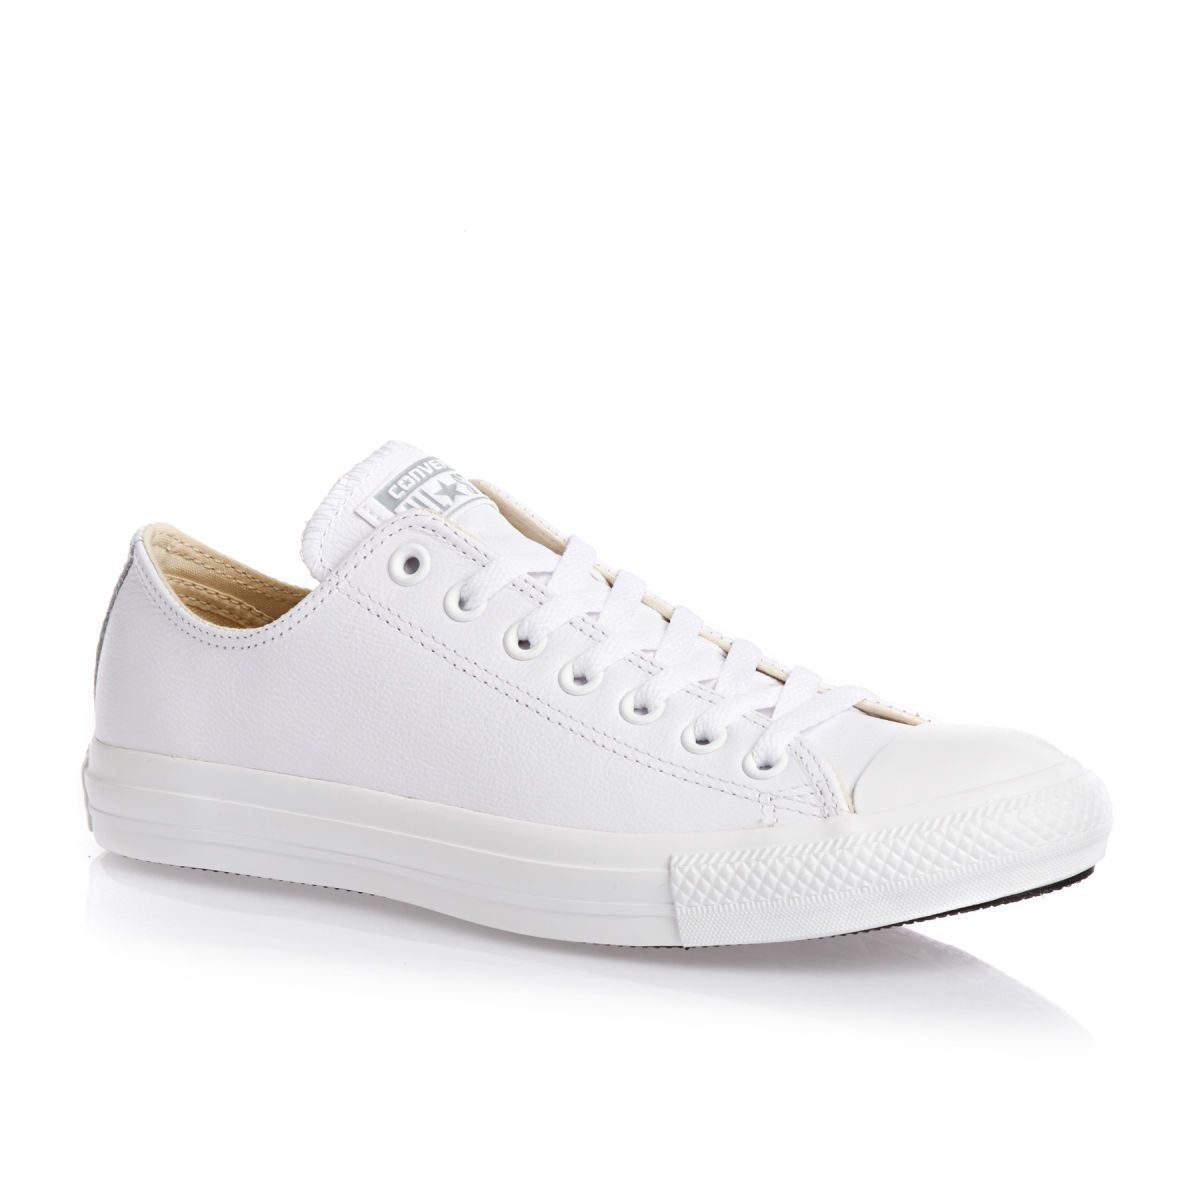 White leather converse